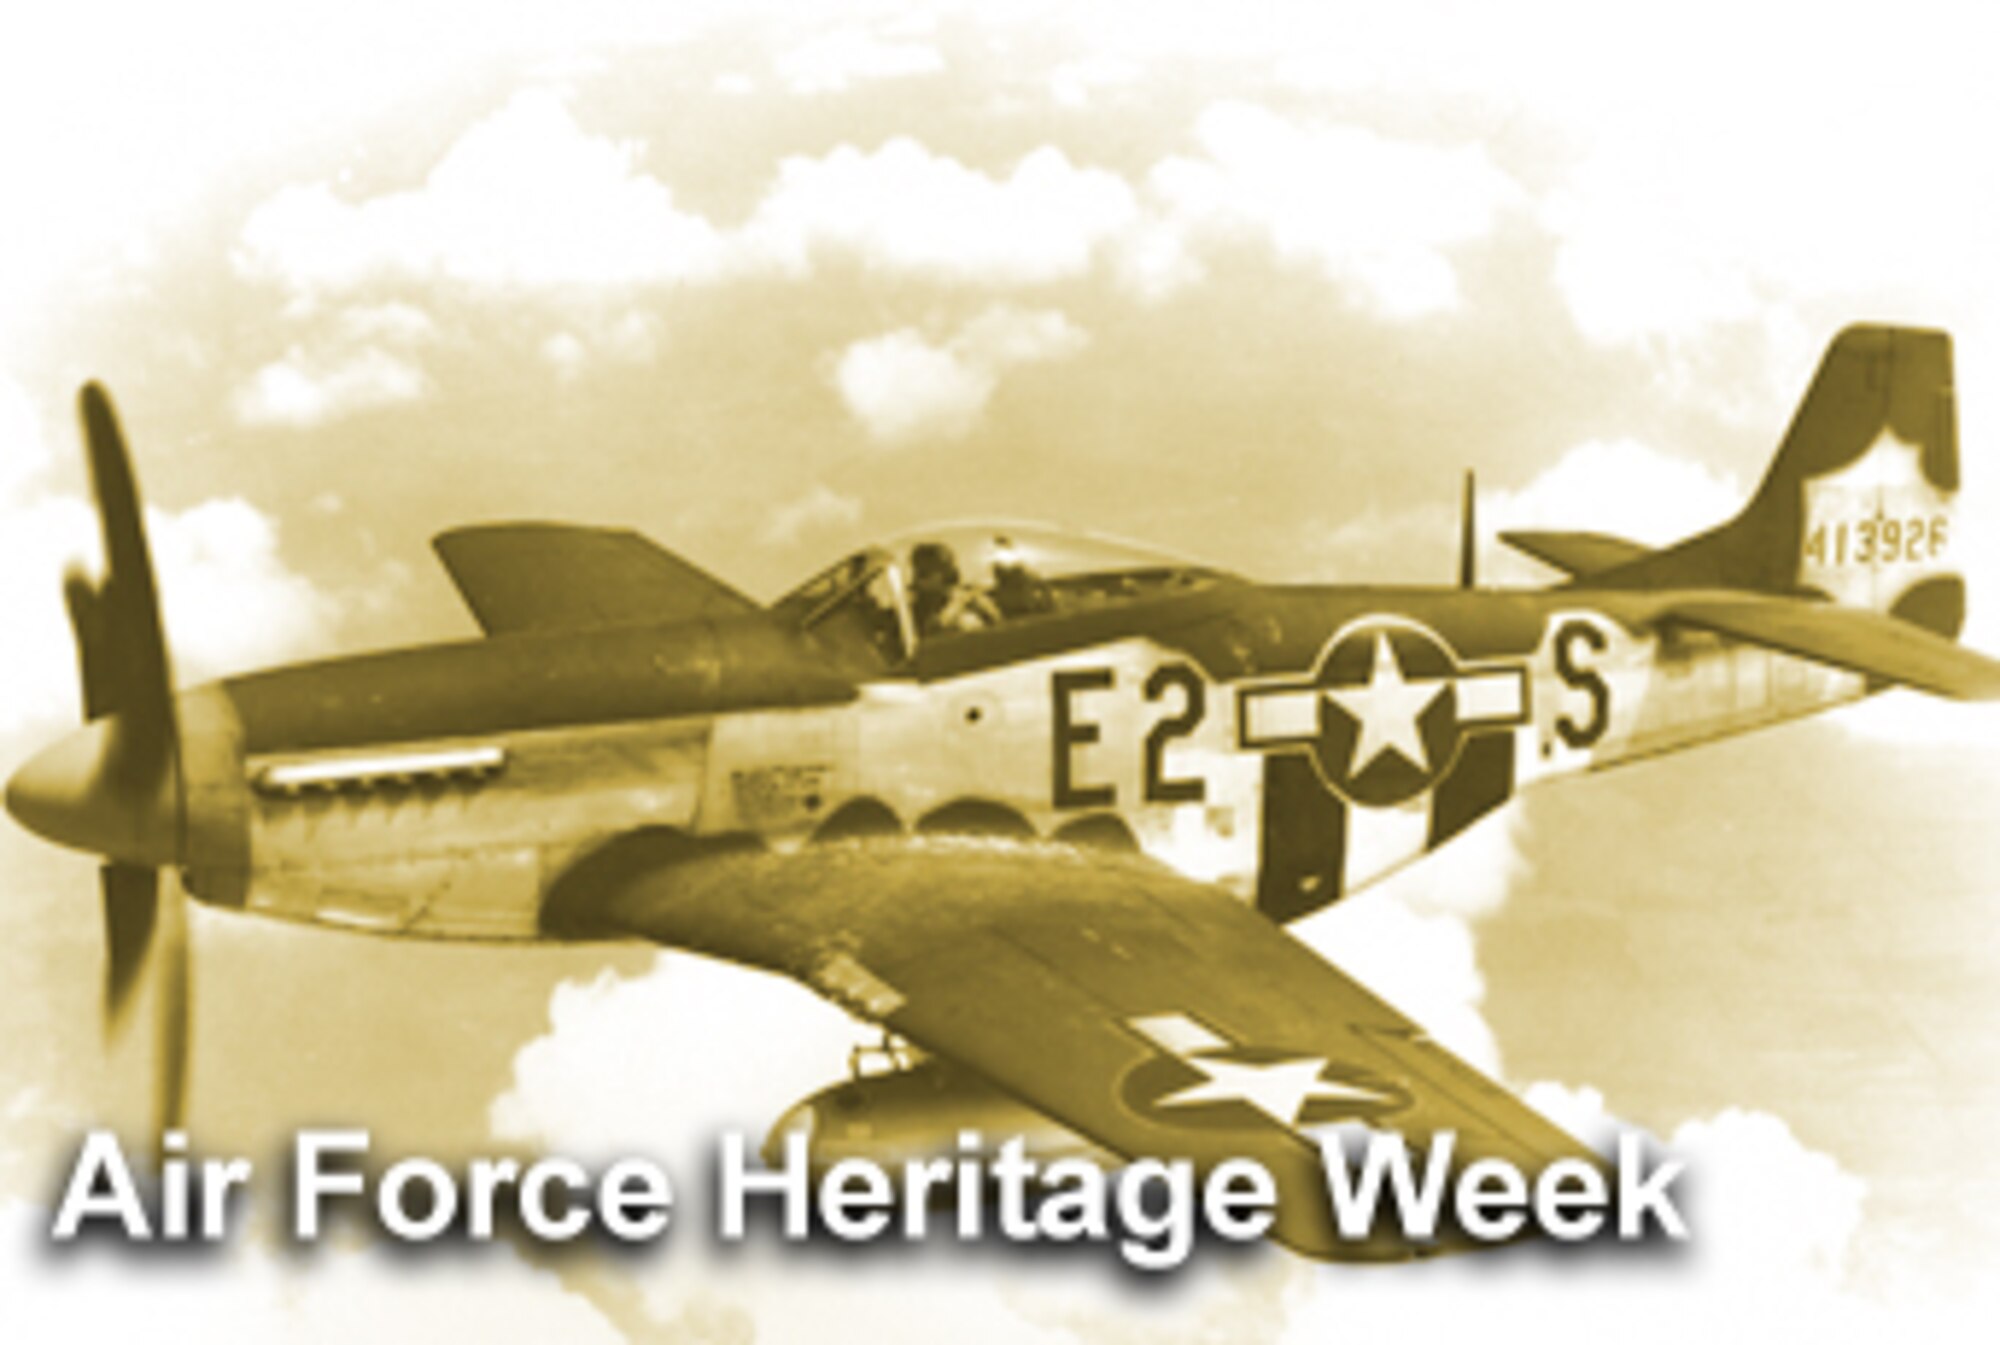 Columbus, Ohio has been selected to play host to Air Force Heritage Week in late September in conjunction with The Gathering of Mustangs and Legends being held at Rickenbacker International Airport Sept. 27-30. (U.S. Air Force illustration/Mike Carabajal) 